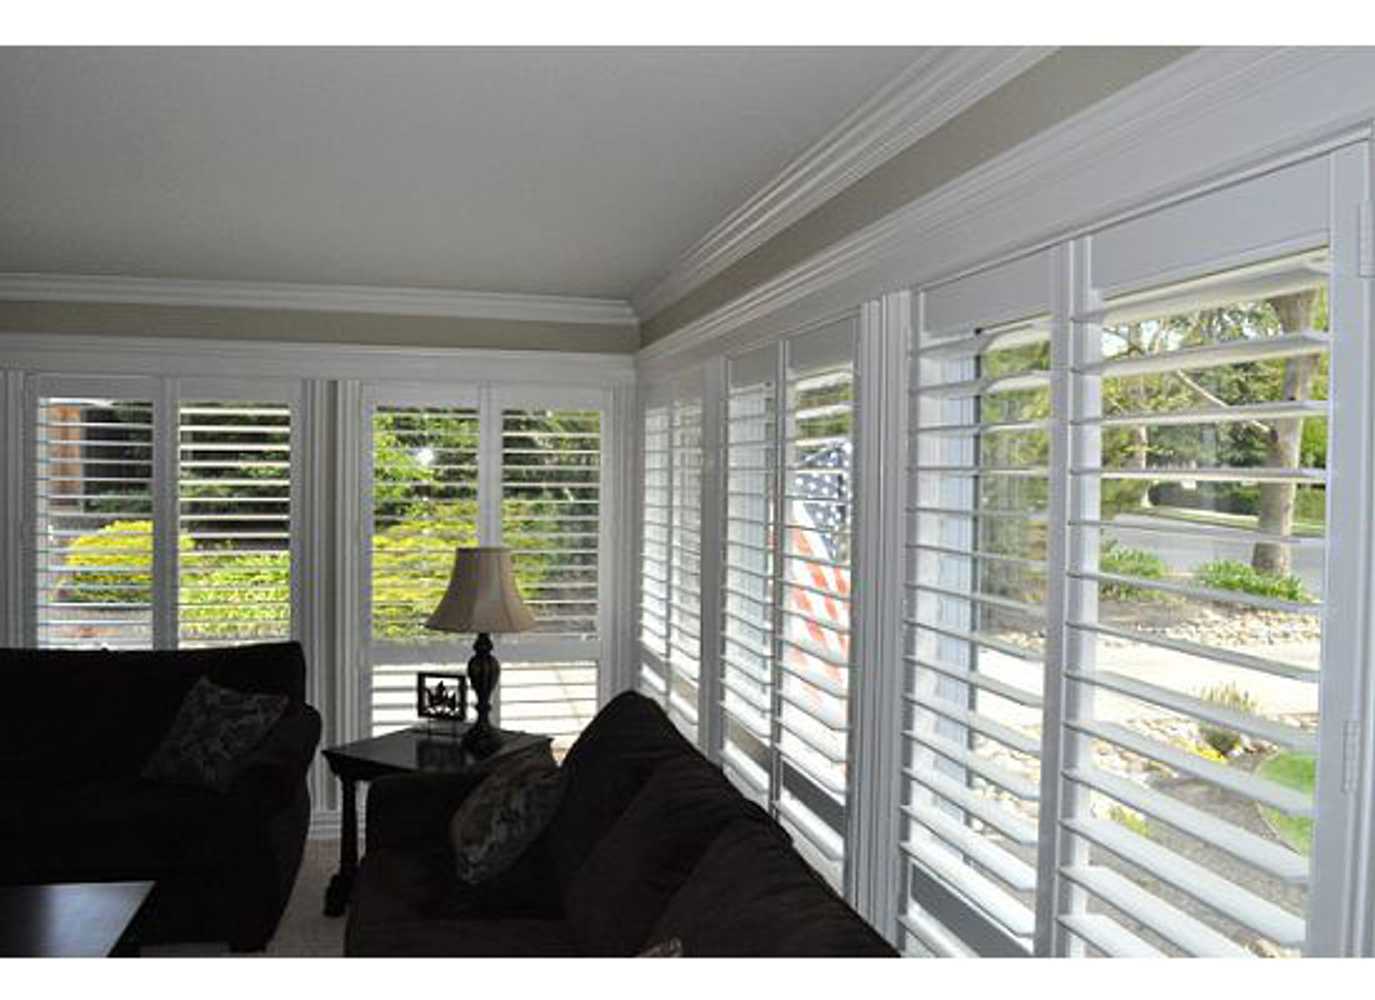 Project photos from World Class Window Coverings Co